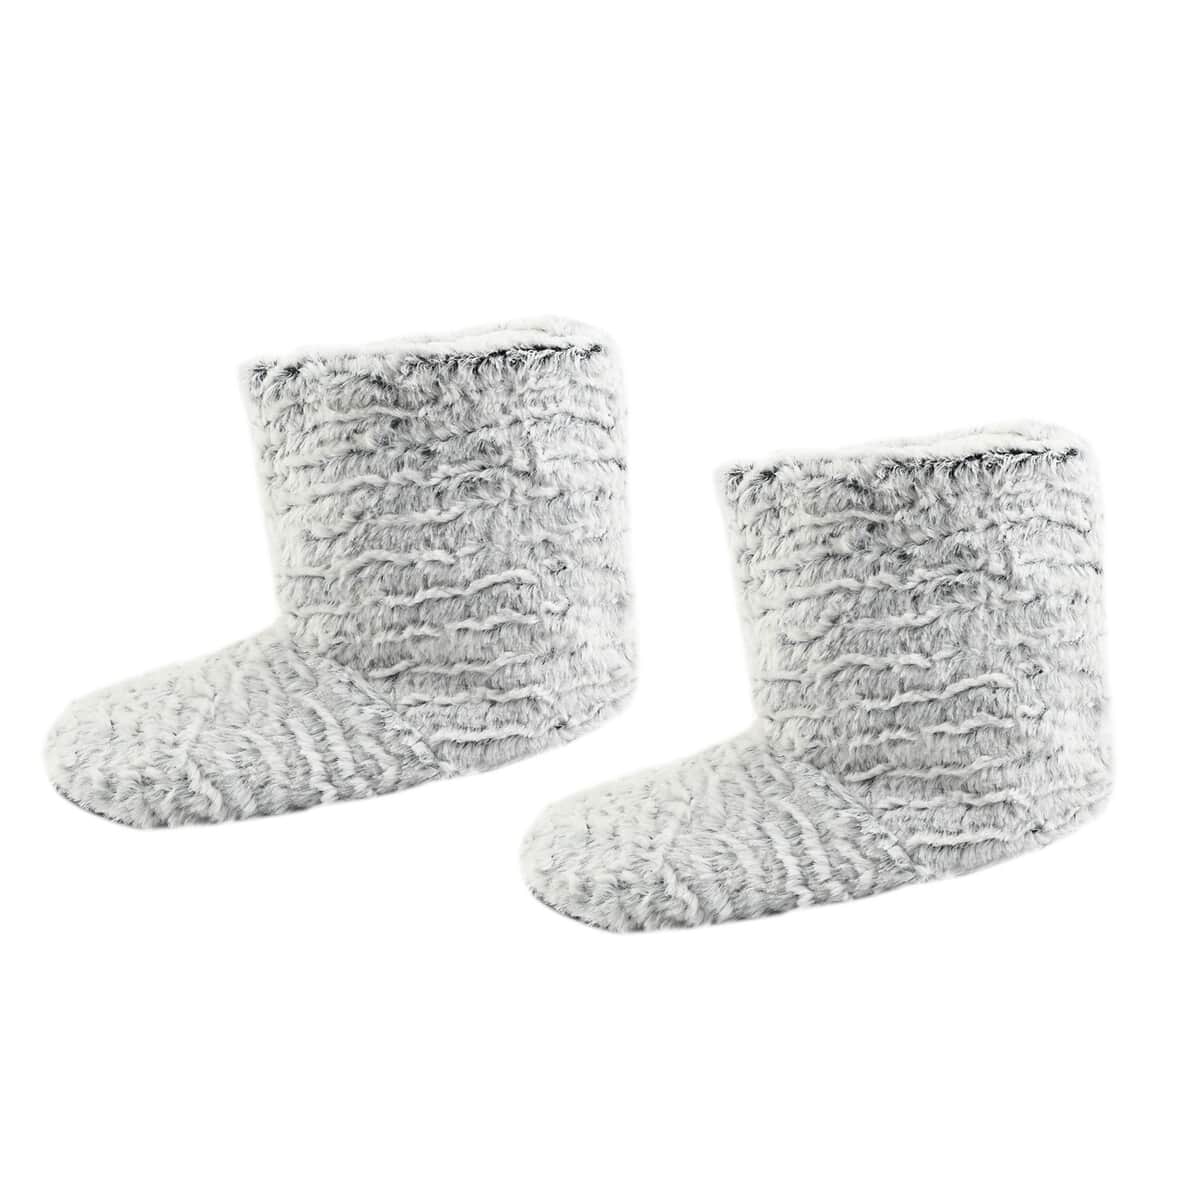 Homesmart Gray Microfiber Faux Fur, Sherpa Booties and Matching Ballerina Slippers (Women's Size 5-10) image number 1